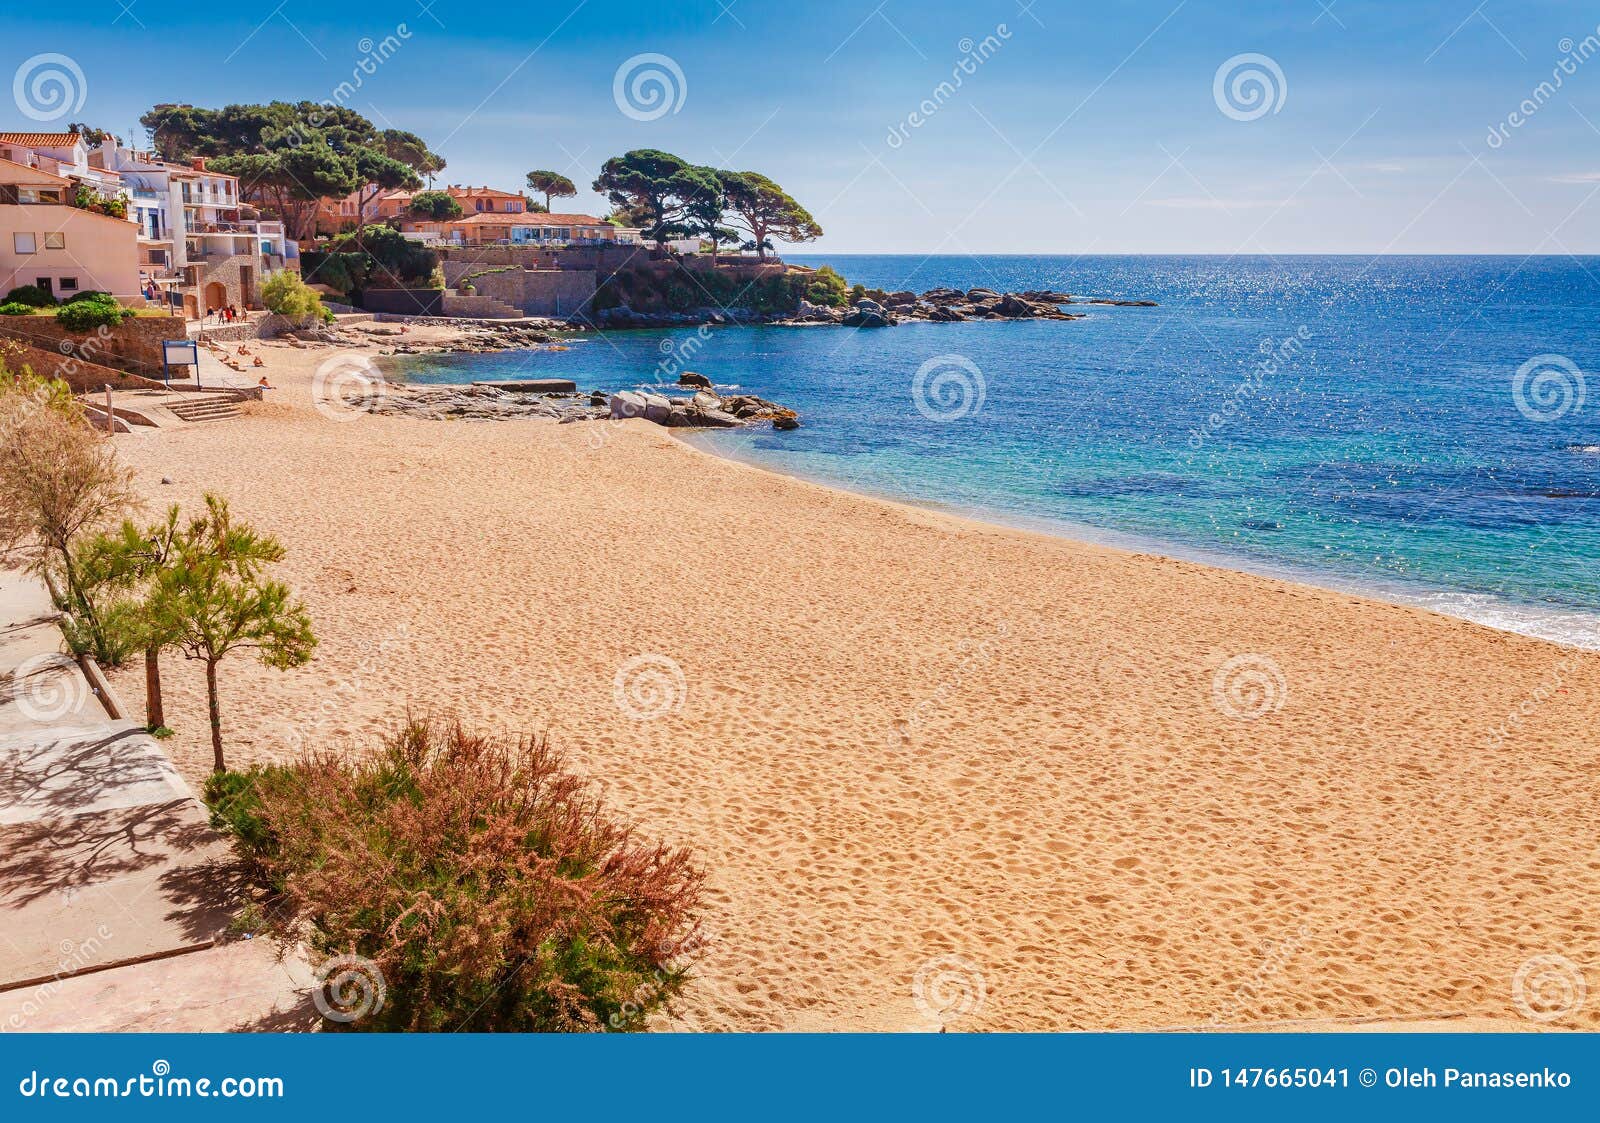 sea landscape with calella de palafrugell, catalonia, spain near of barcelona. scenic fisherman village with nice sand beach and